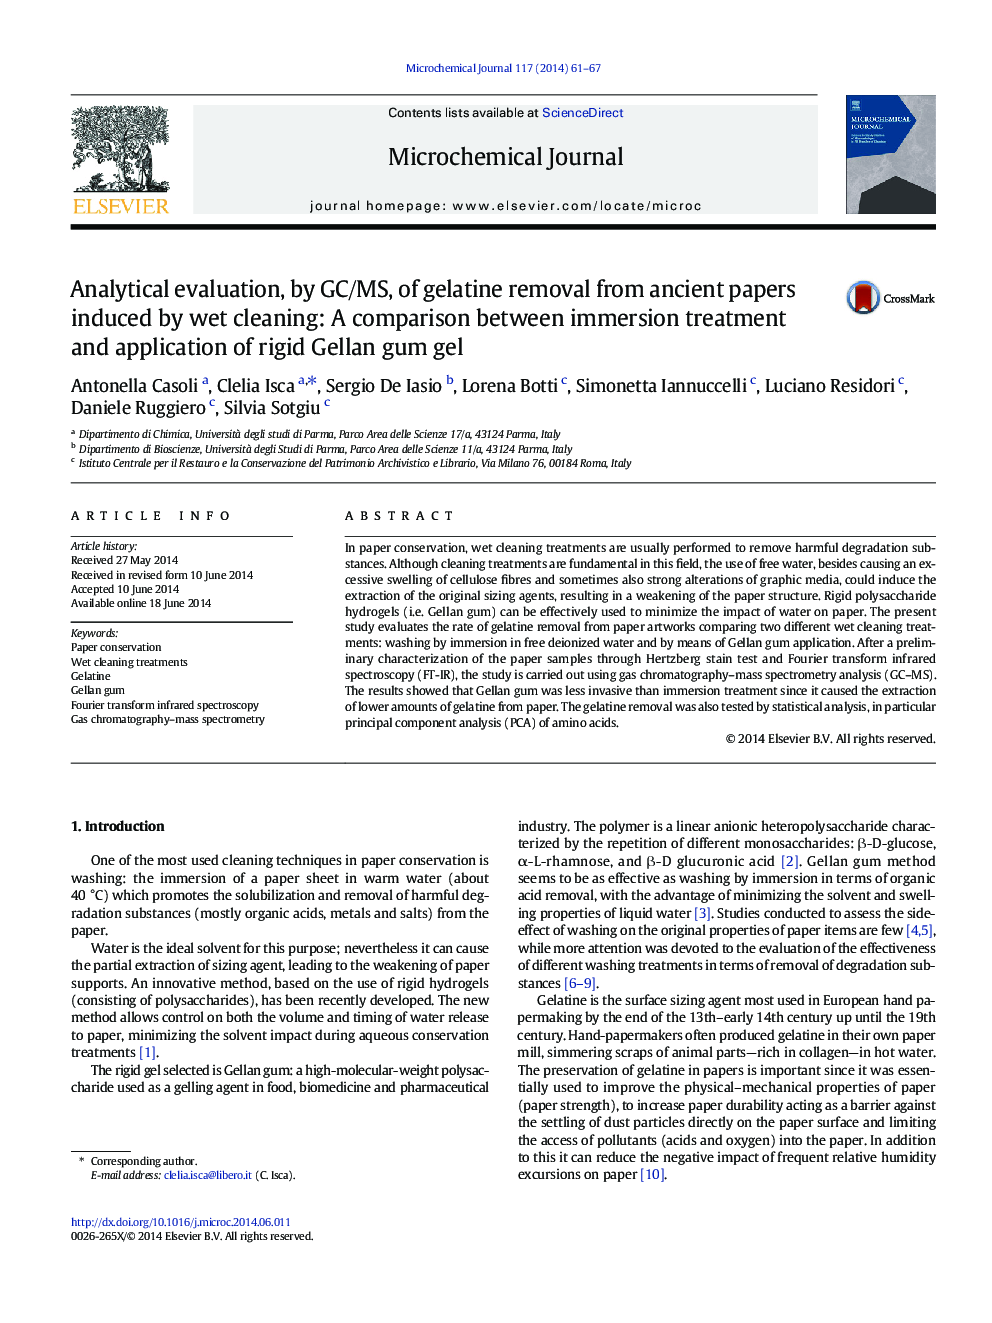 Analytical evaluation, by GC/MS, of gelatine removal from ancient papers induced by wet cleaning: A comparison between immersion treatment and application of rigid Gellan gum gel